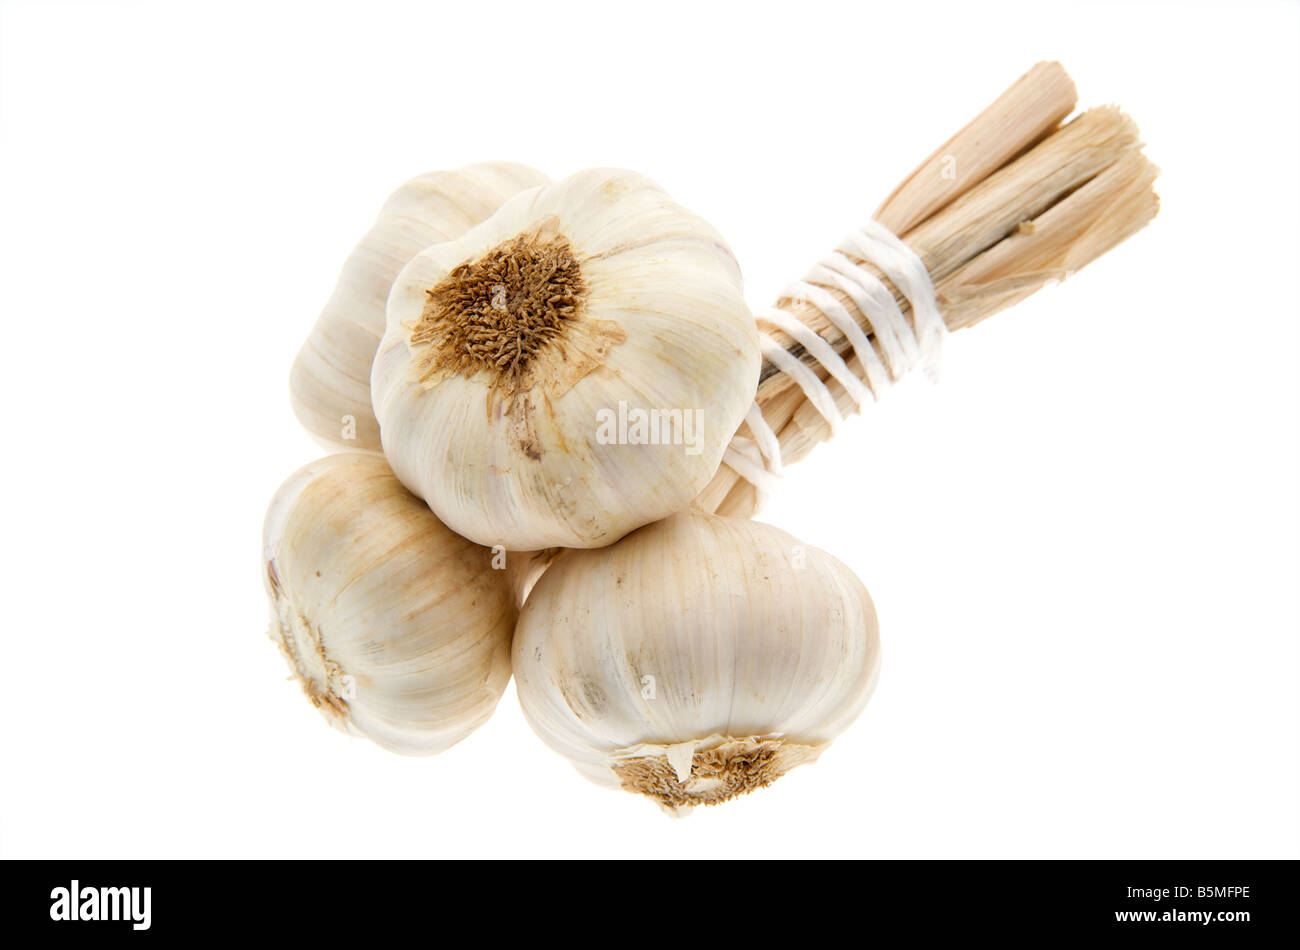 A stalk of dried garlic bulbs against a white background Stock Photo